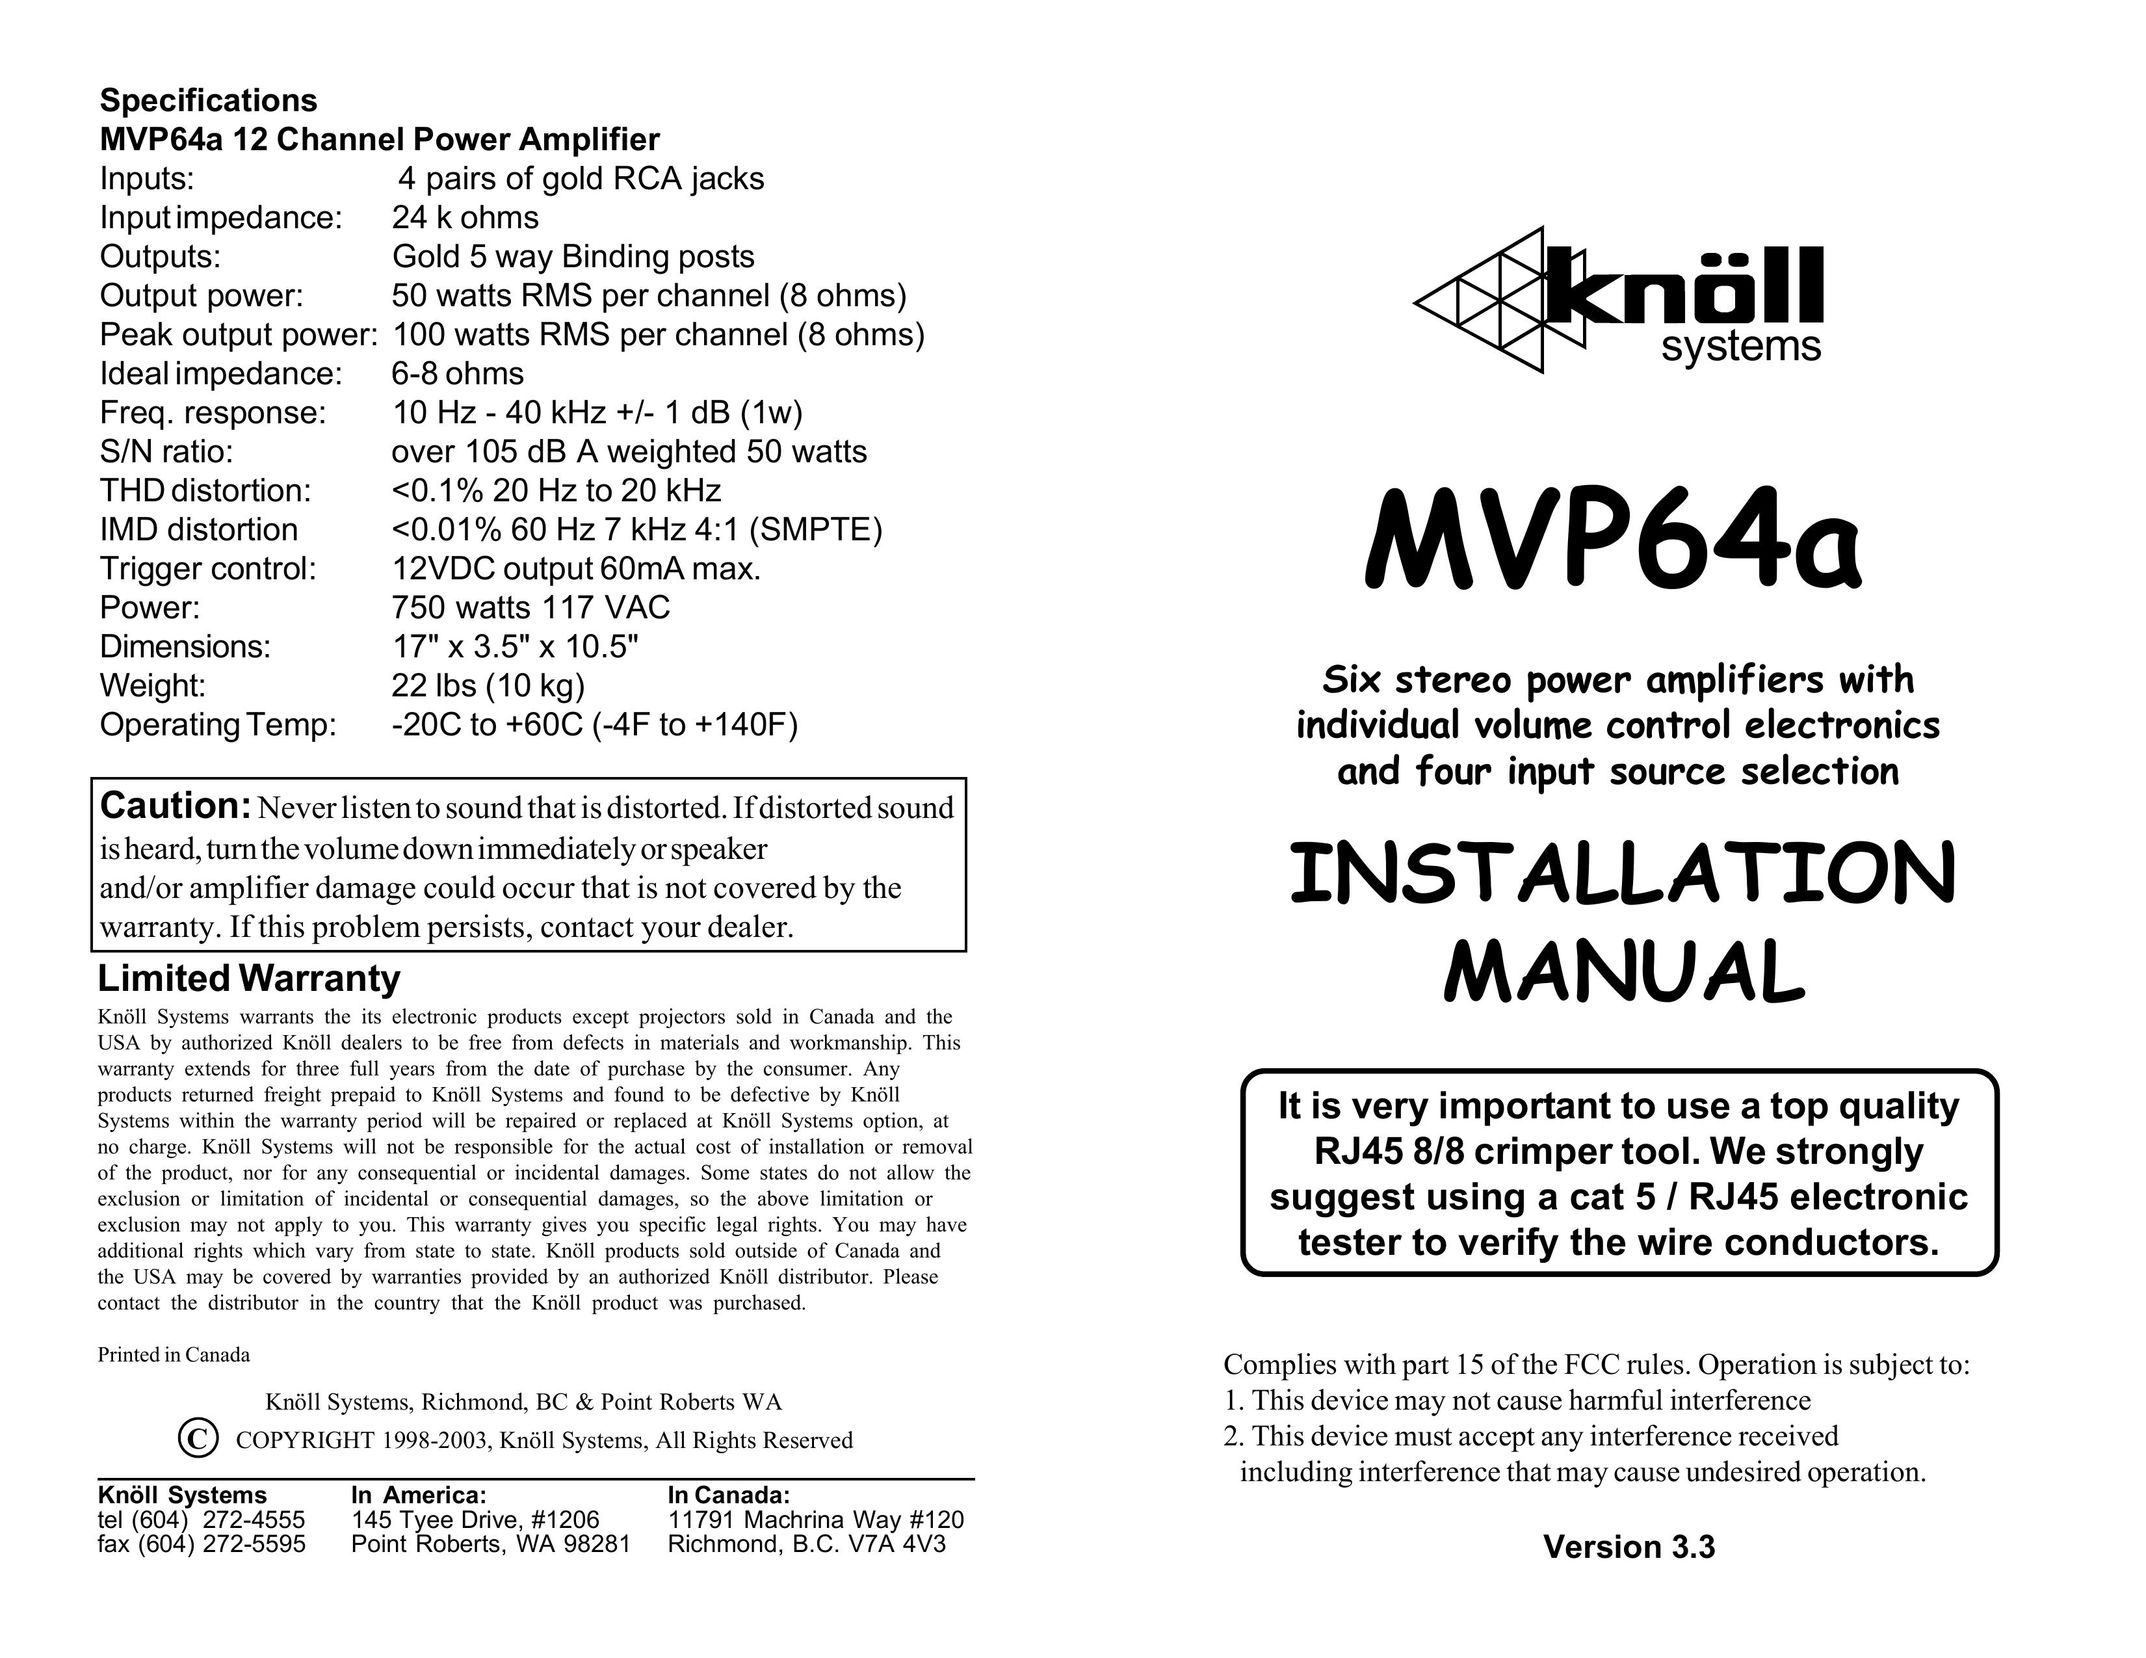 Knoll Systems MVP64A Stereo Amplifier User Manual